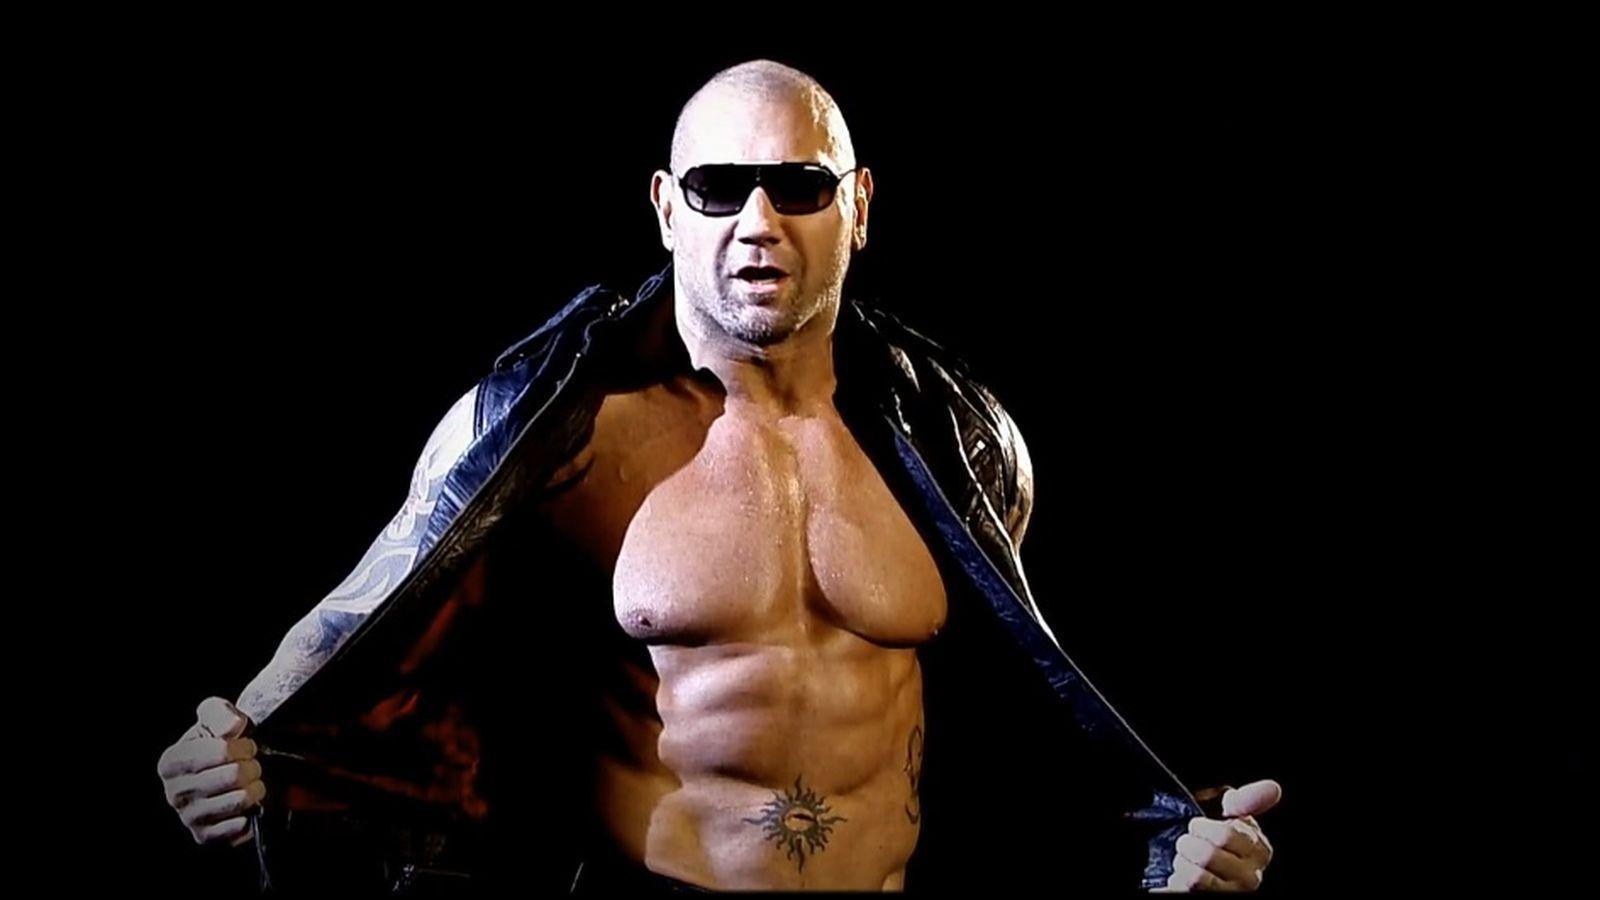 Batista now saying he knew WWE fans would boo him when he returned